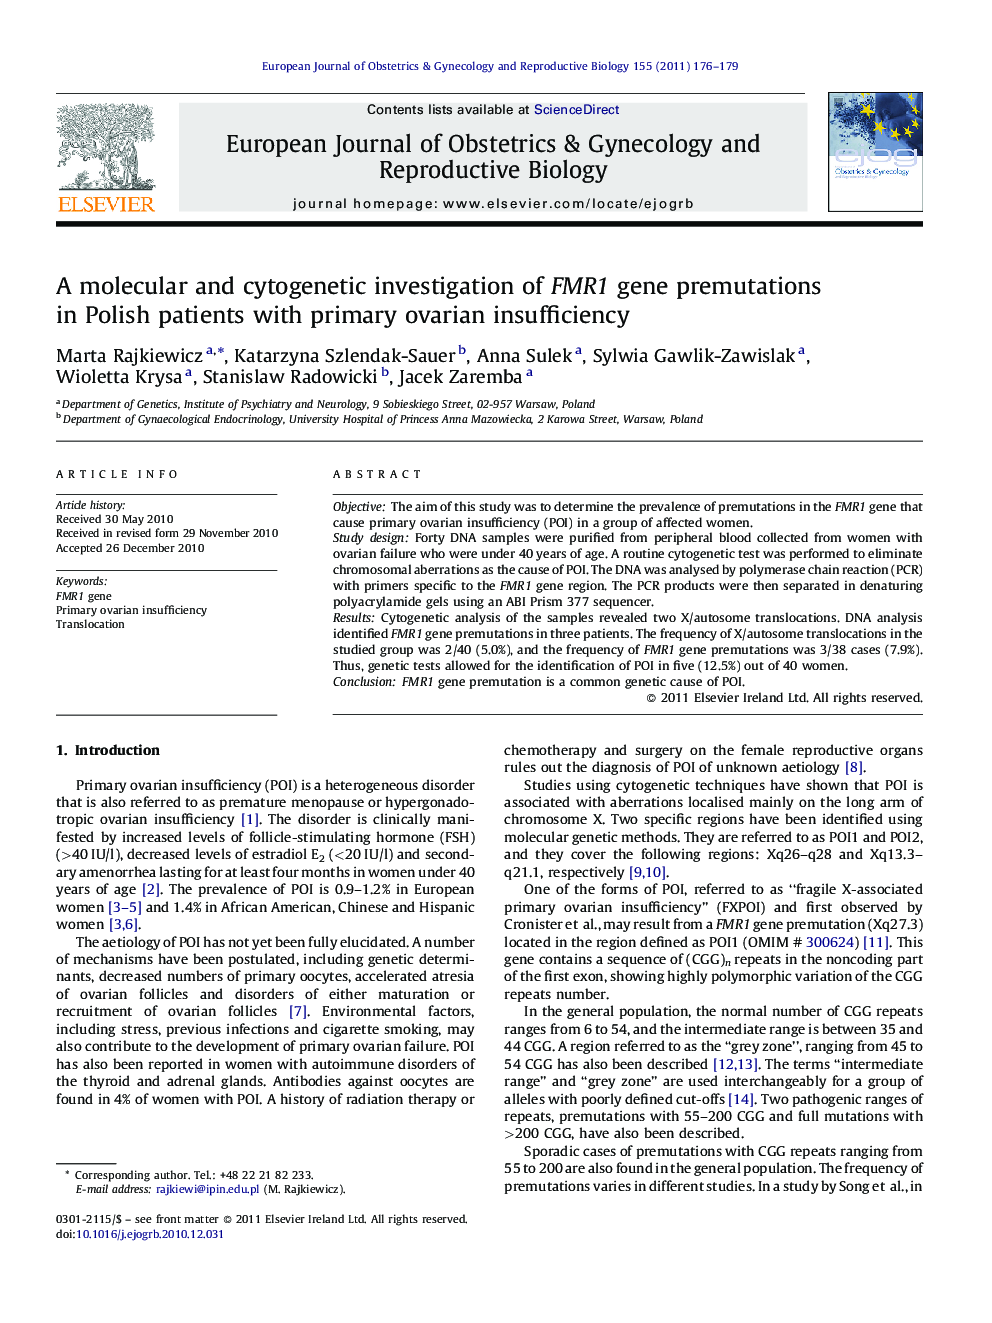 A molecular and cytogenetic investigation of FMR1 gene premutations in Polish patients with primary ovarian insufficiency